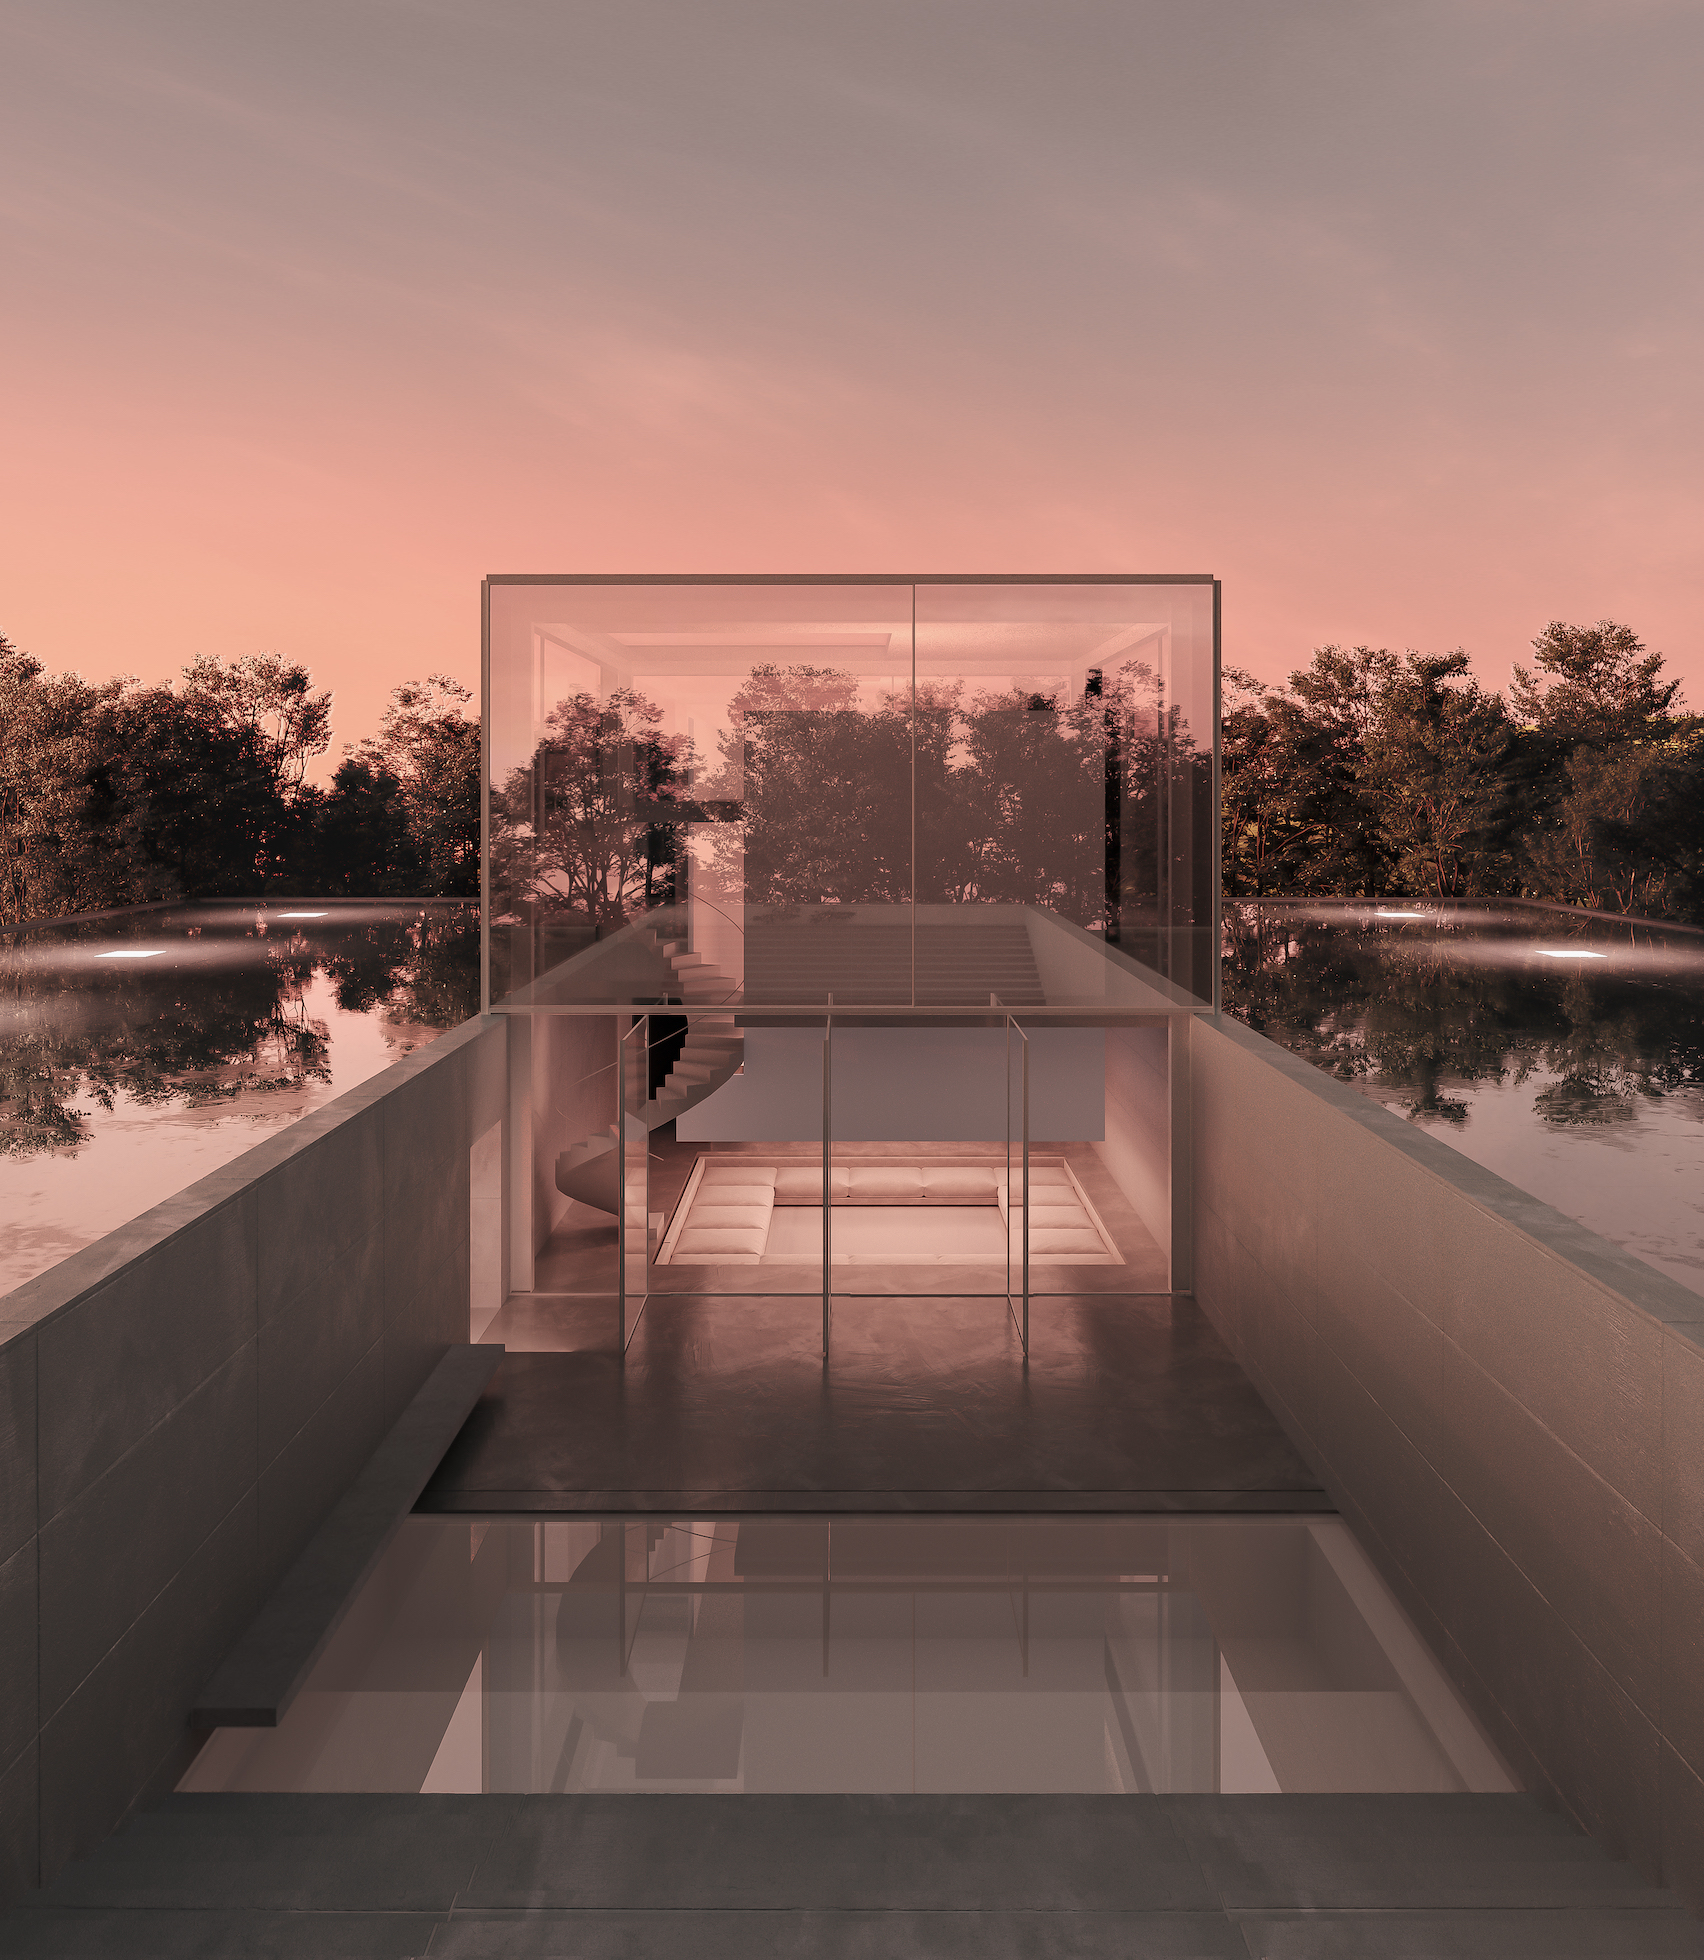 Sheer glass house designed for the metaverse